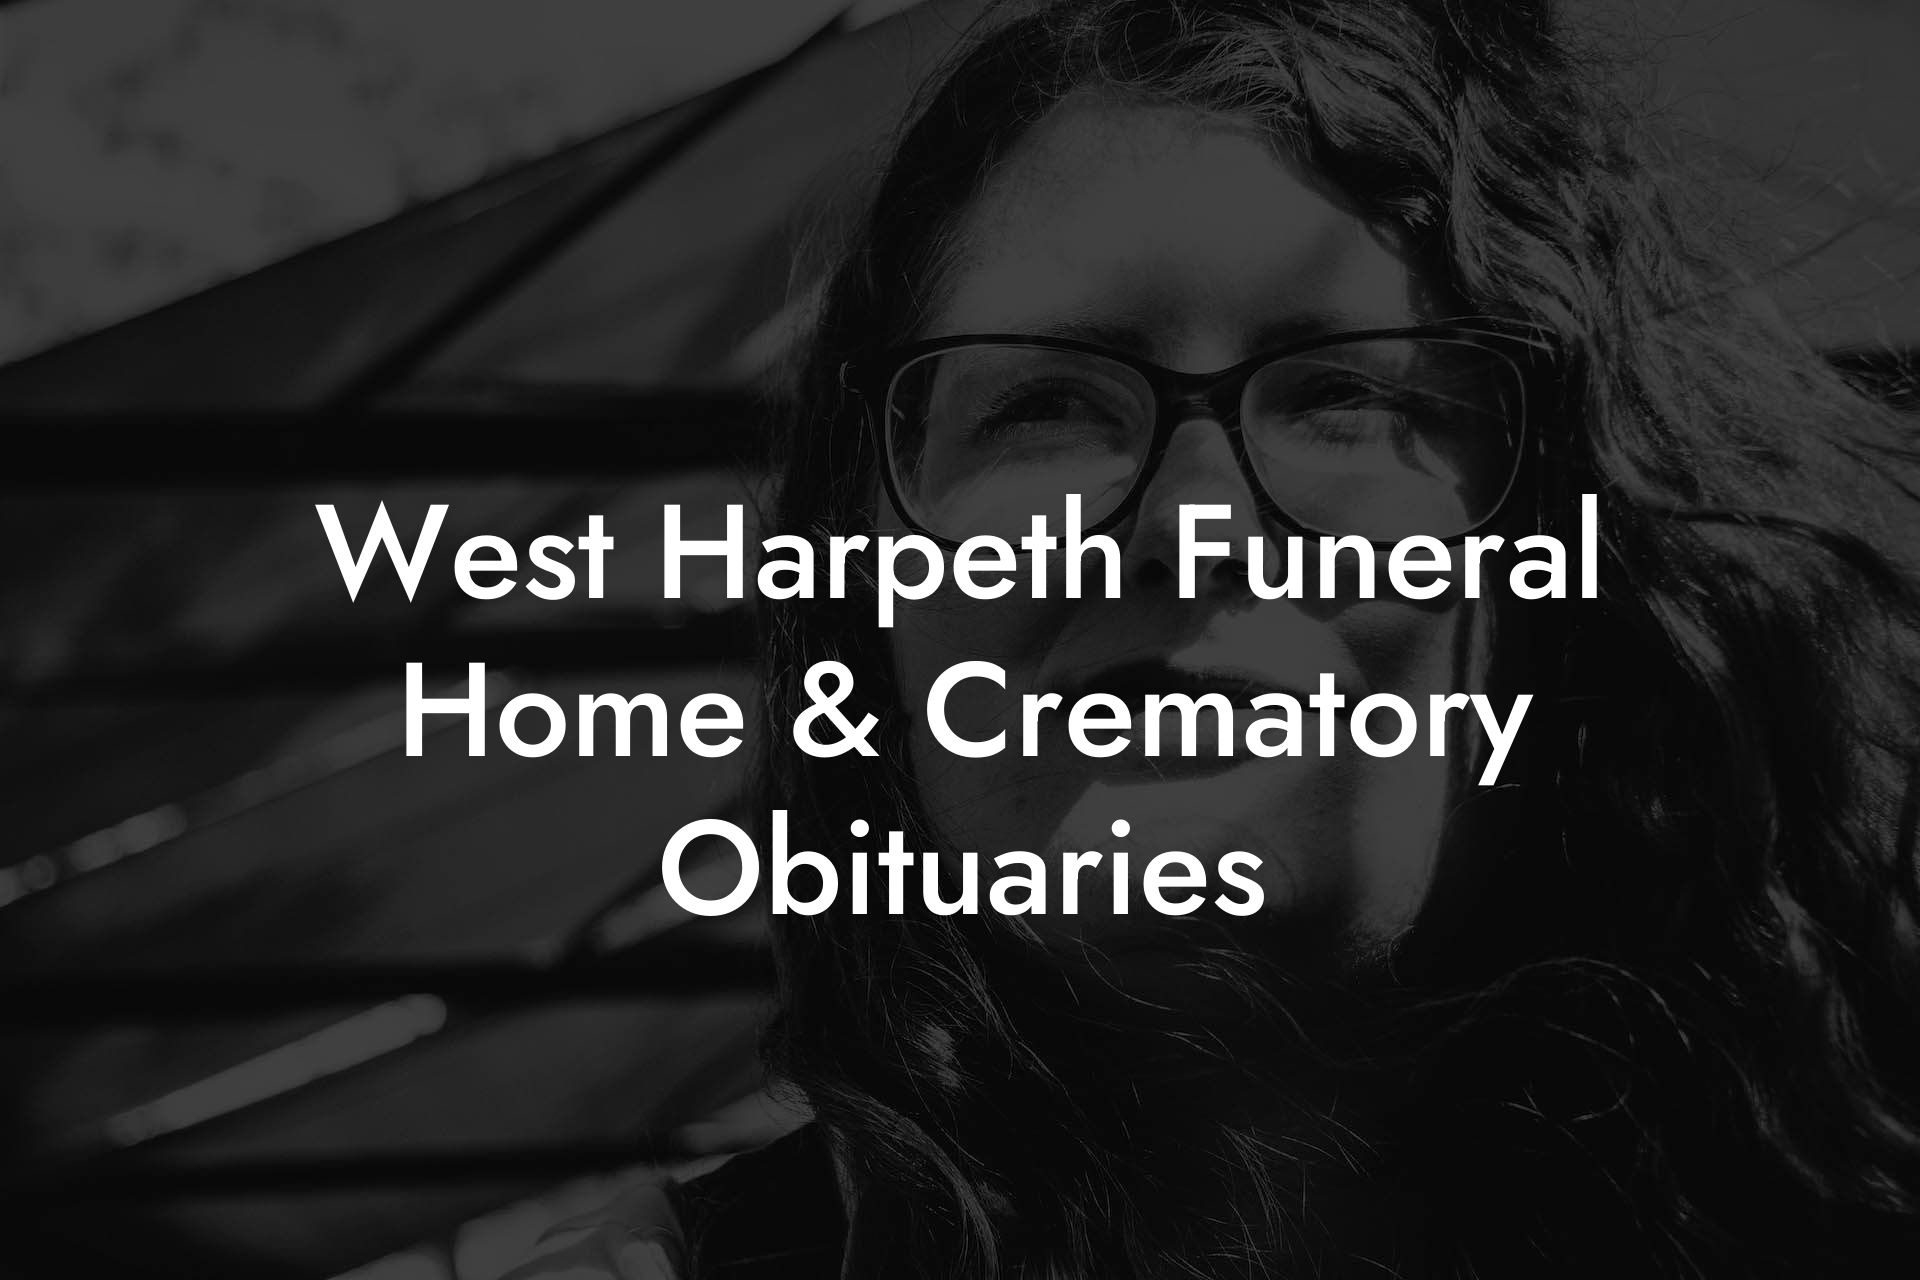 West Harpeth Funeral Home & Crematory Obituaries